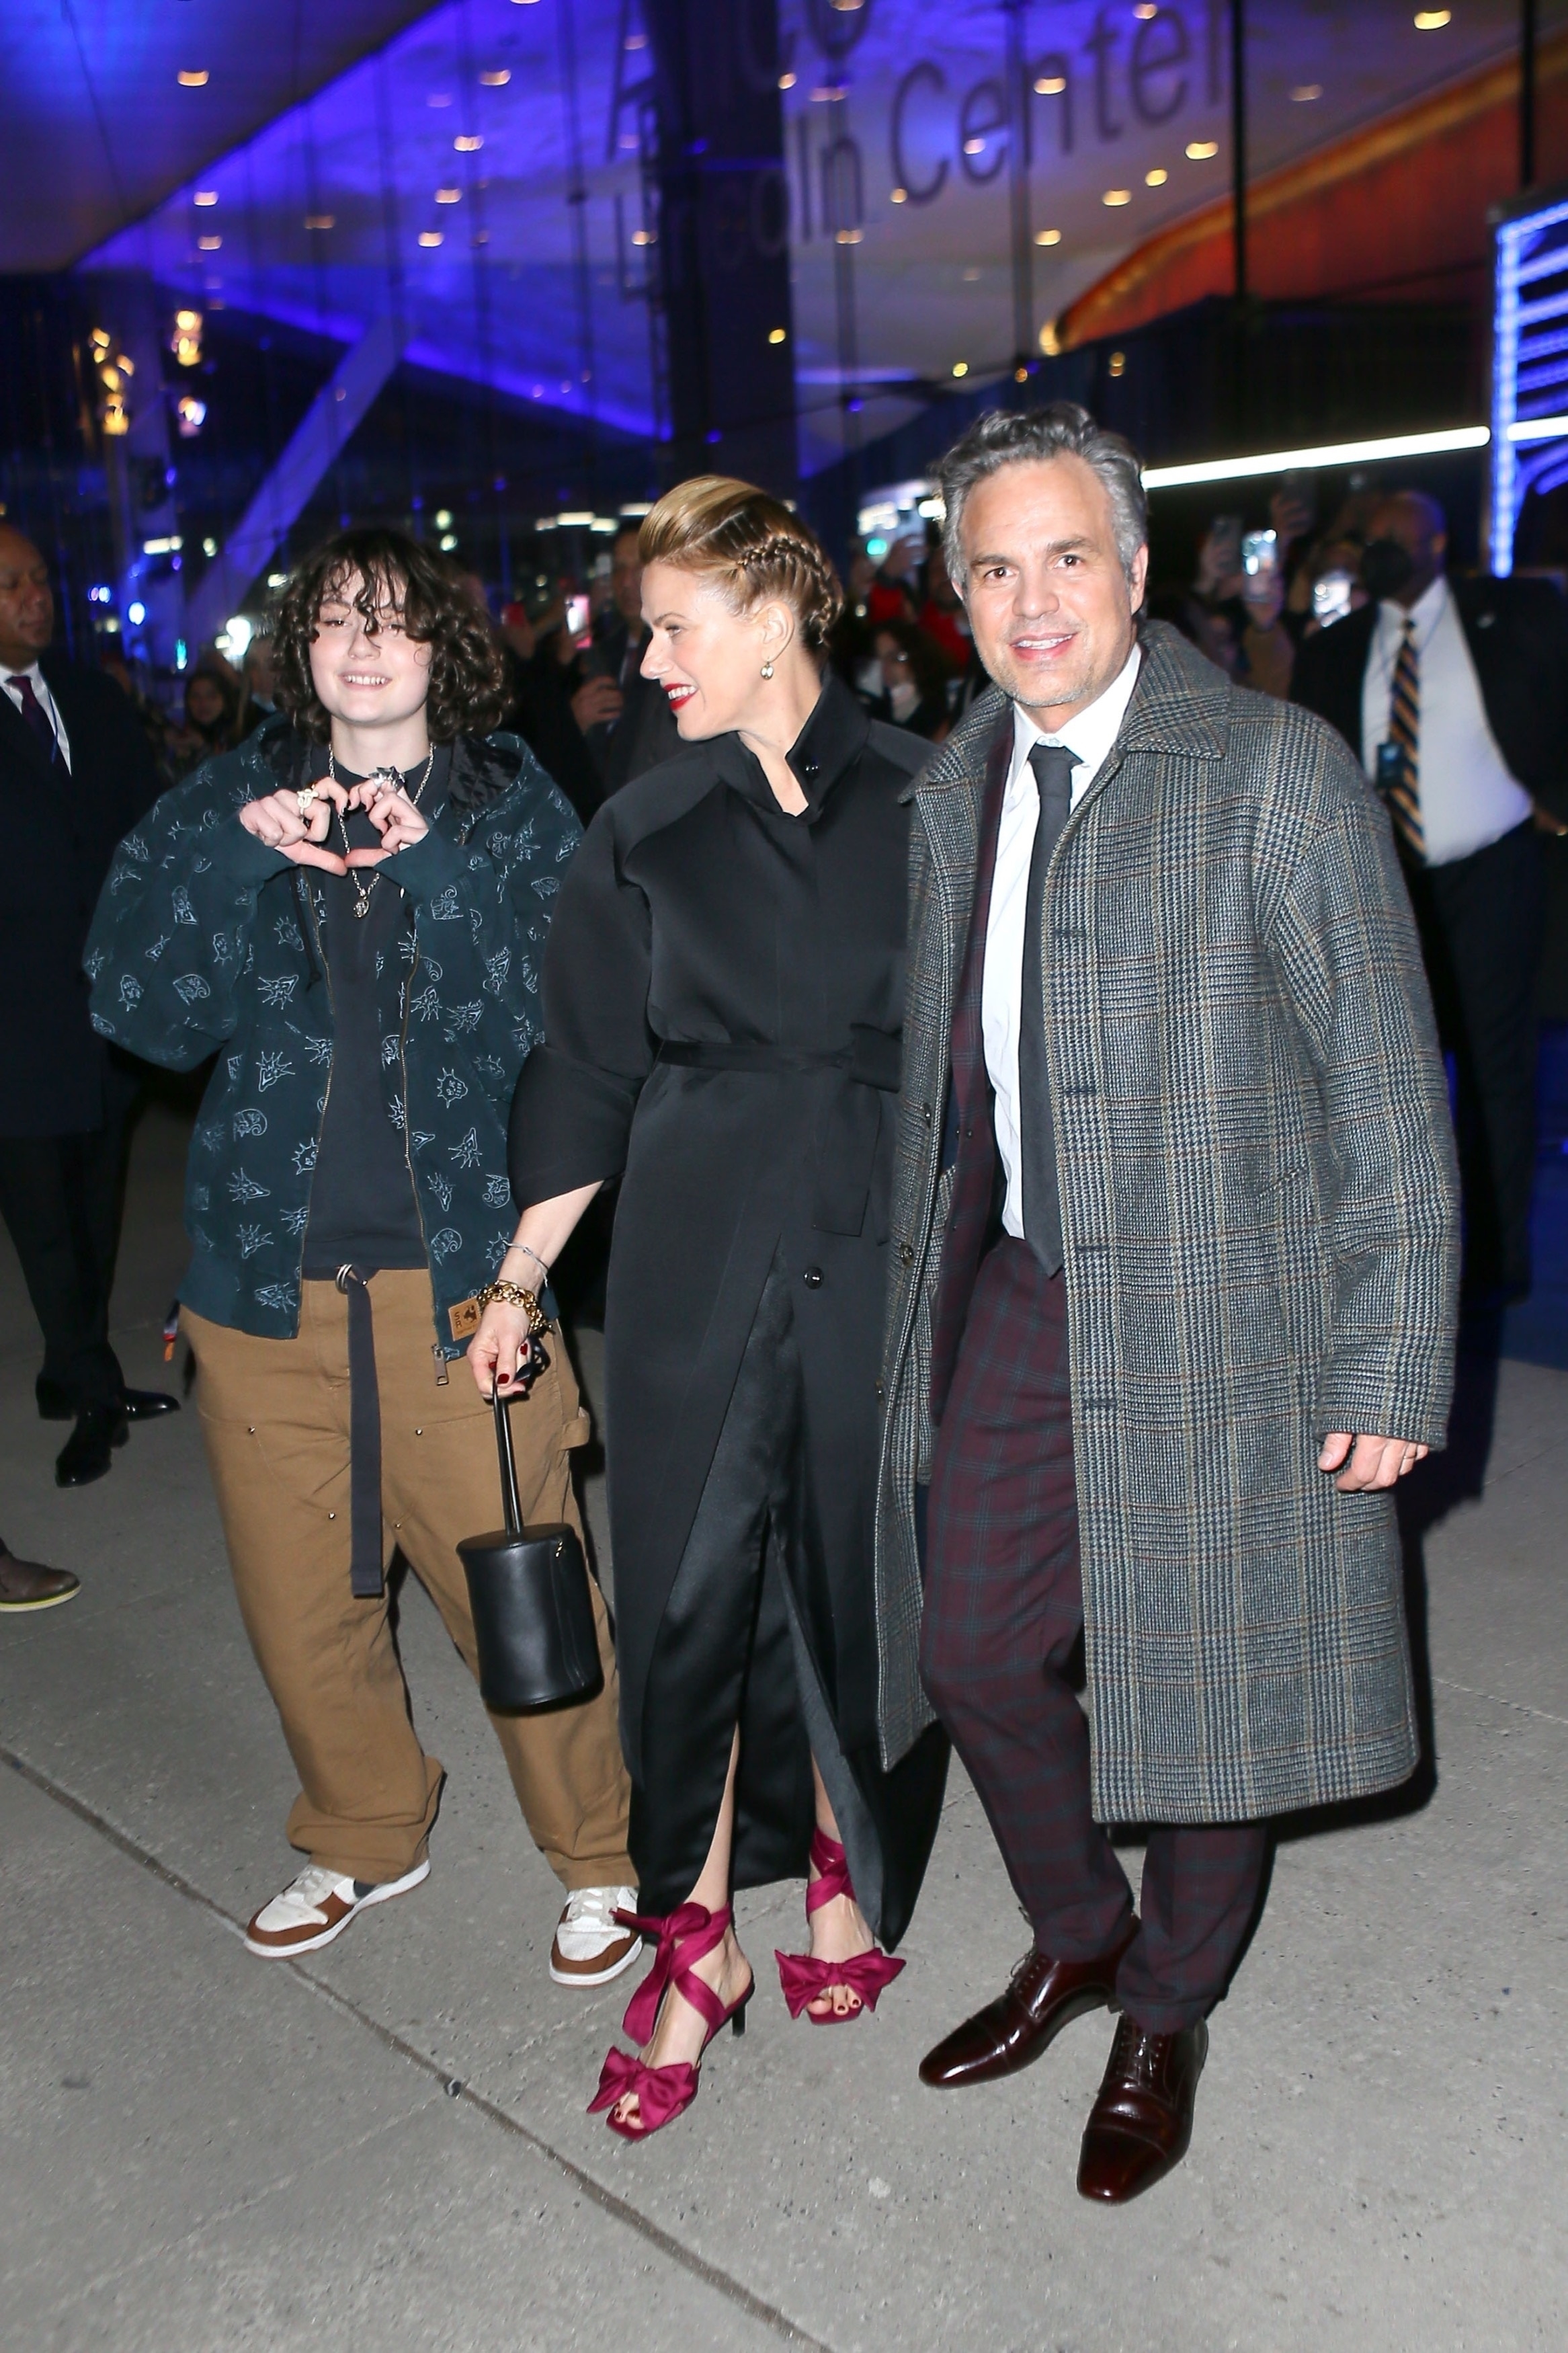 <p>Mark Ruffalo and wife Sunrise Coigney brought daughter Bella (who was born in 2005) to the premiere of his film "The Adam Project" in New York City on Feb. 28, 2022.</p>